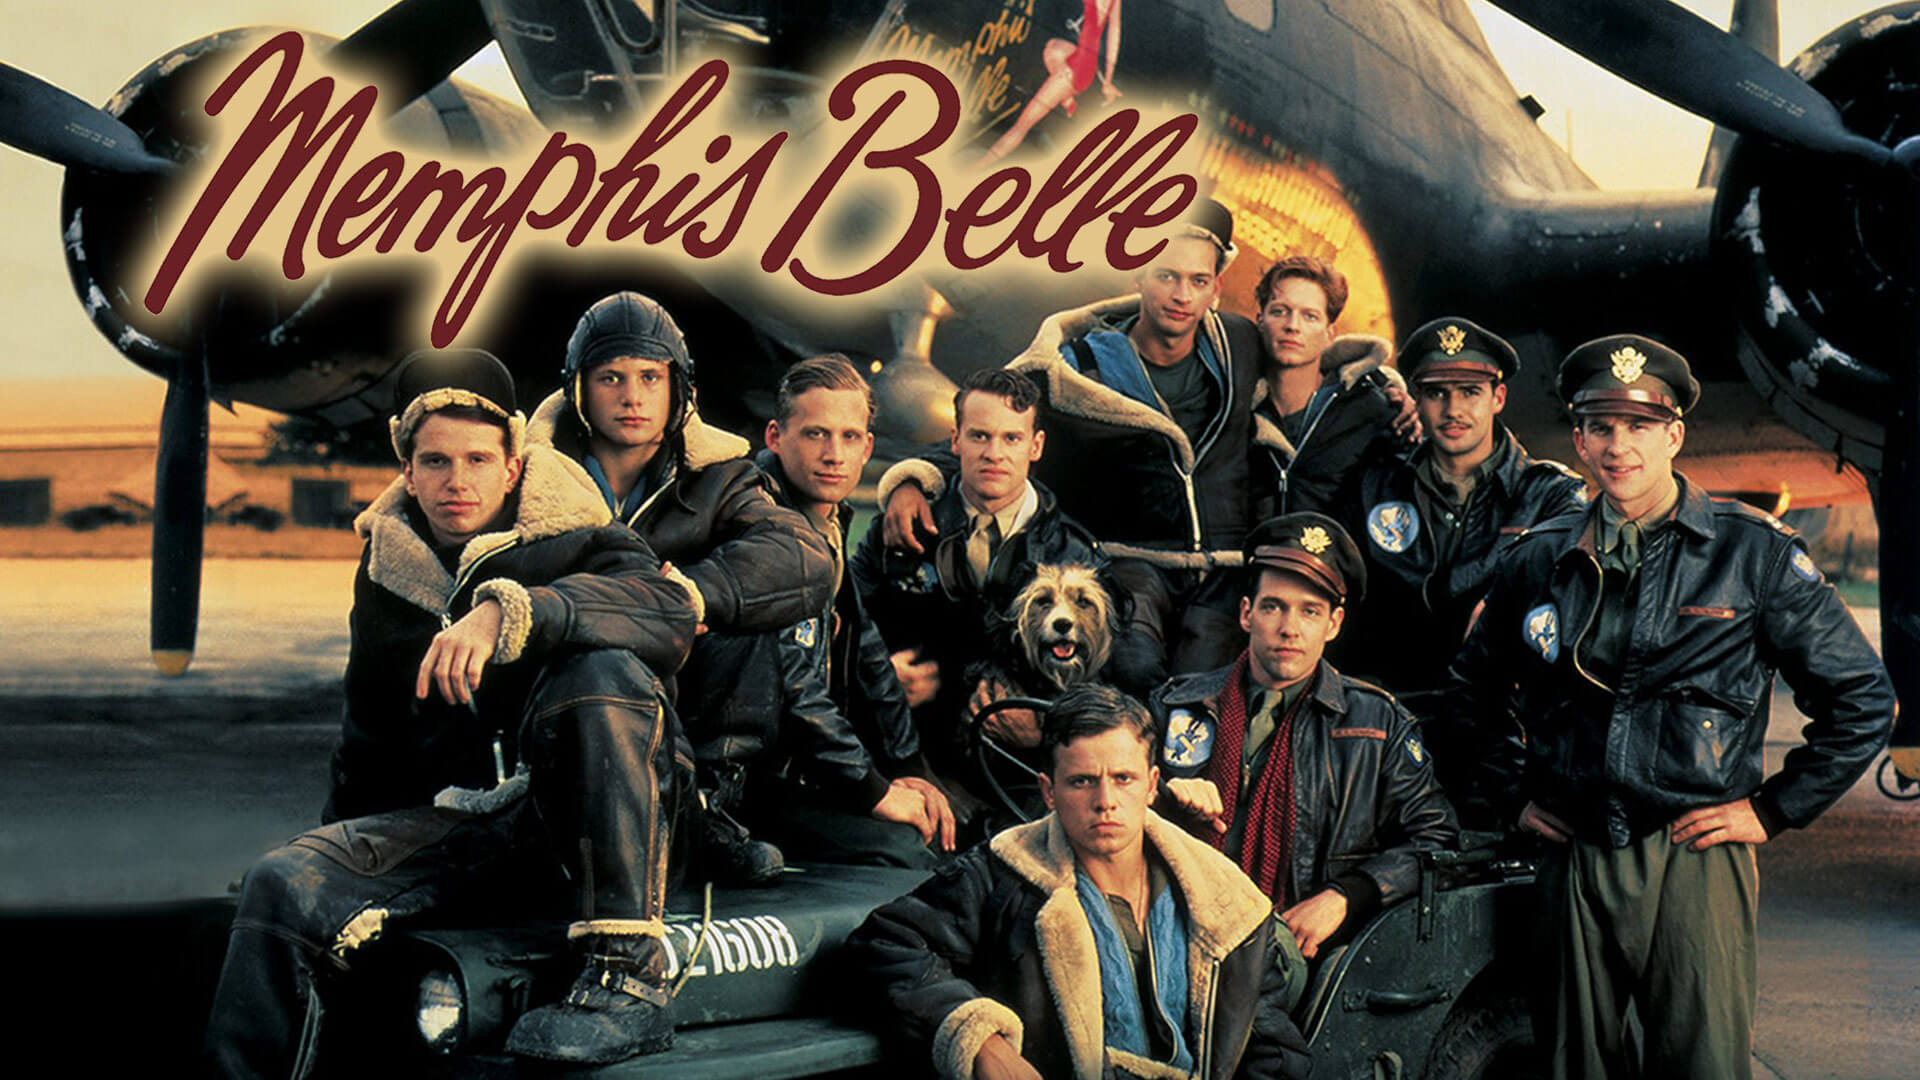 The Truth About the Memphis Belle (No Hollywood)